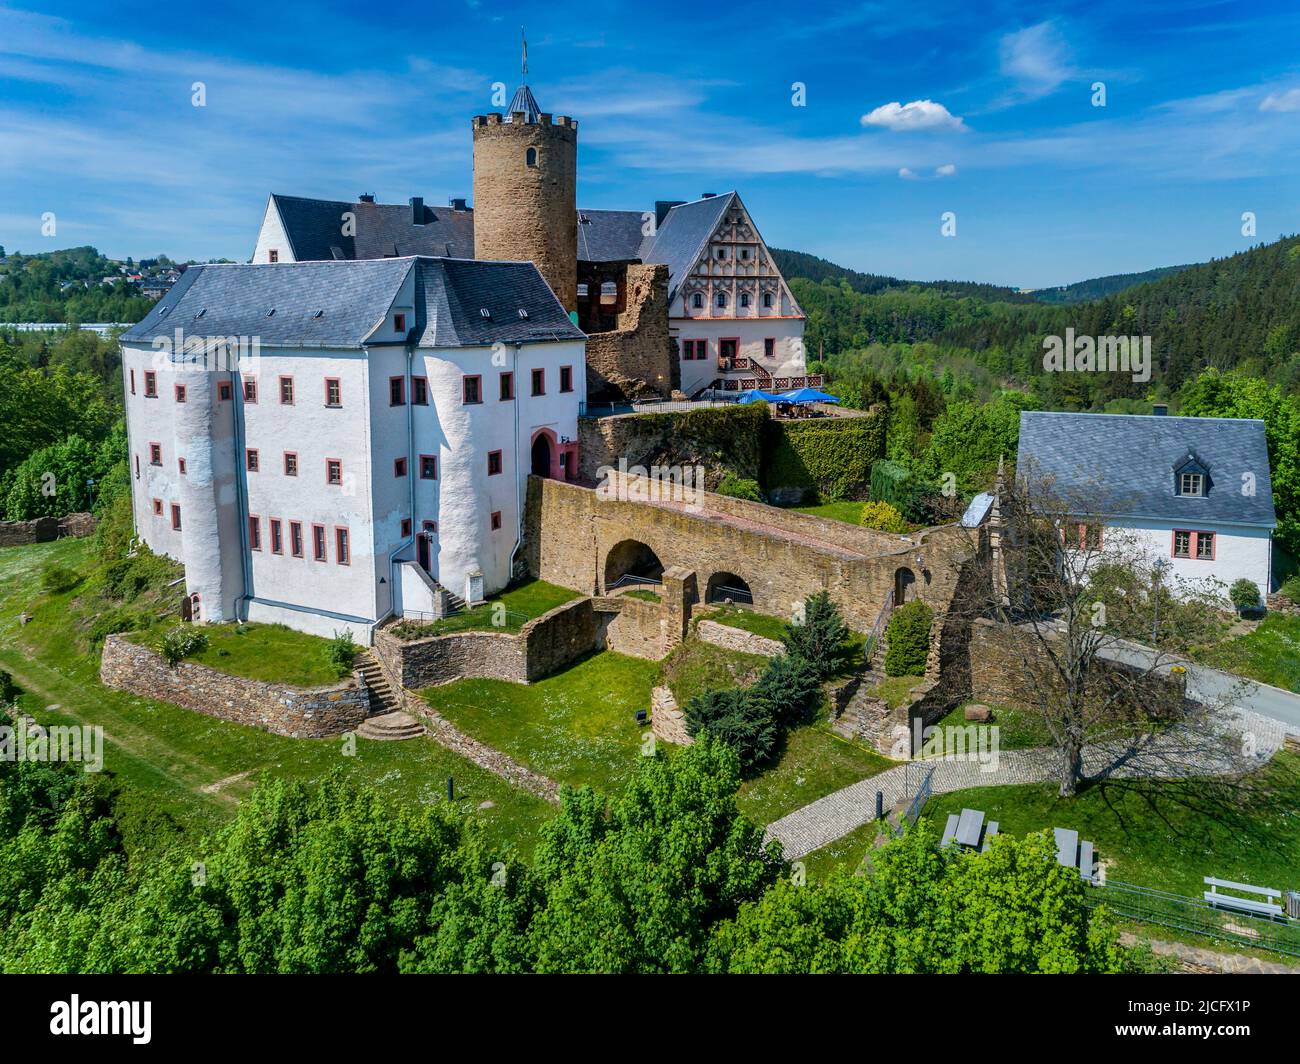 Scharfenstein Castle: South of Zschopau Scharfenstein Castle has developed into an 'adventure castle'. Mentioned for the first time in 1349, the restored historic walls now house exhibitions, museums and sales outlets with traditional items Stock Photo